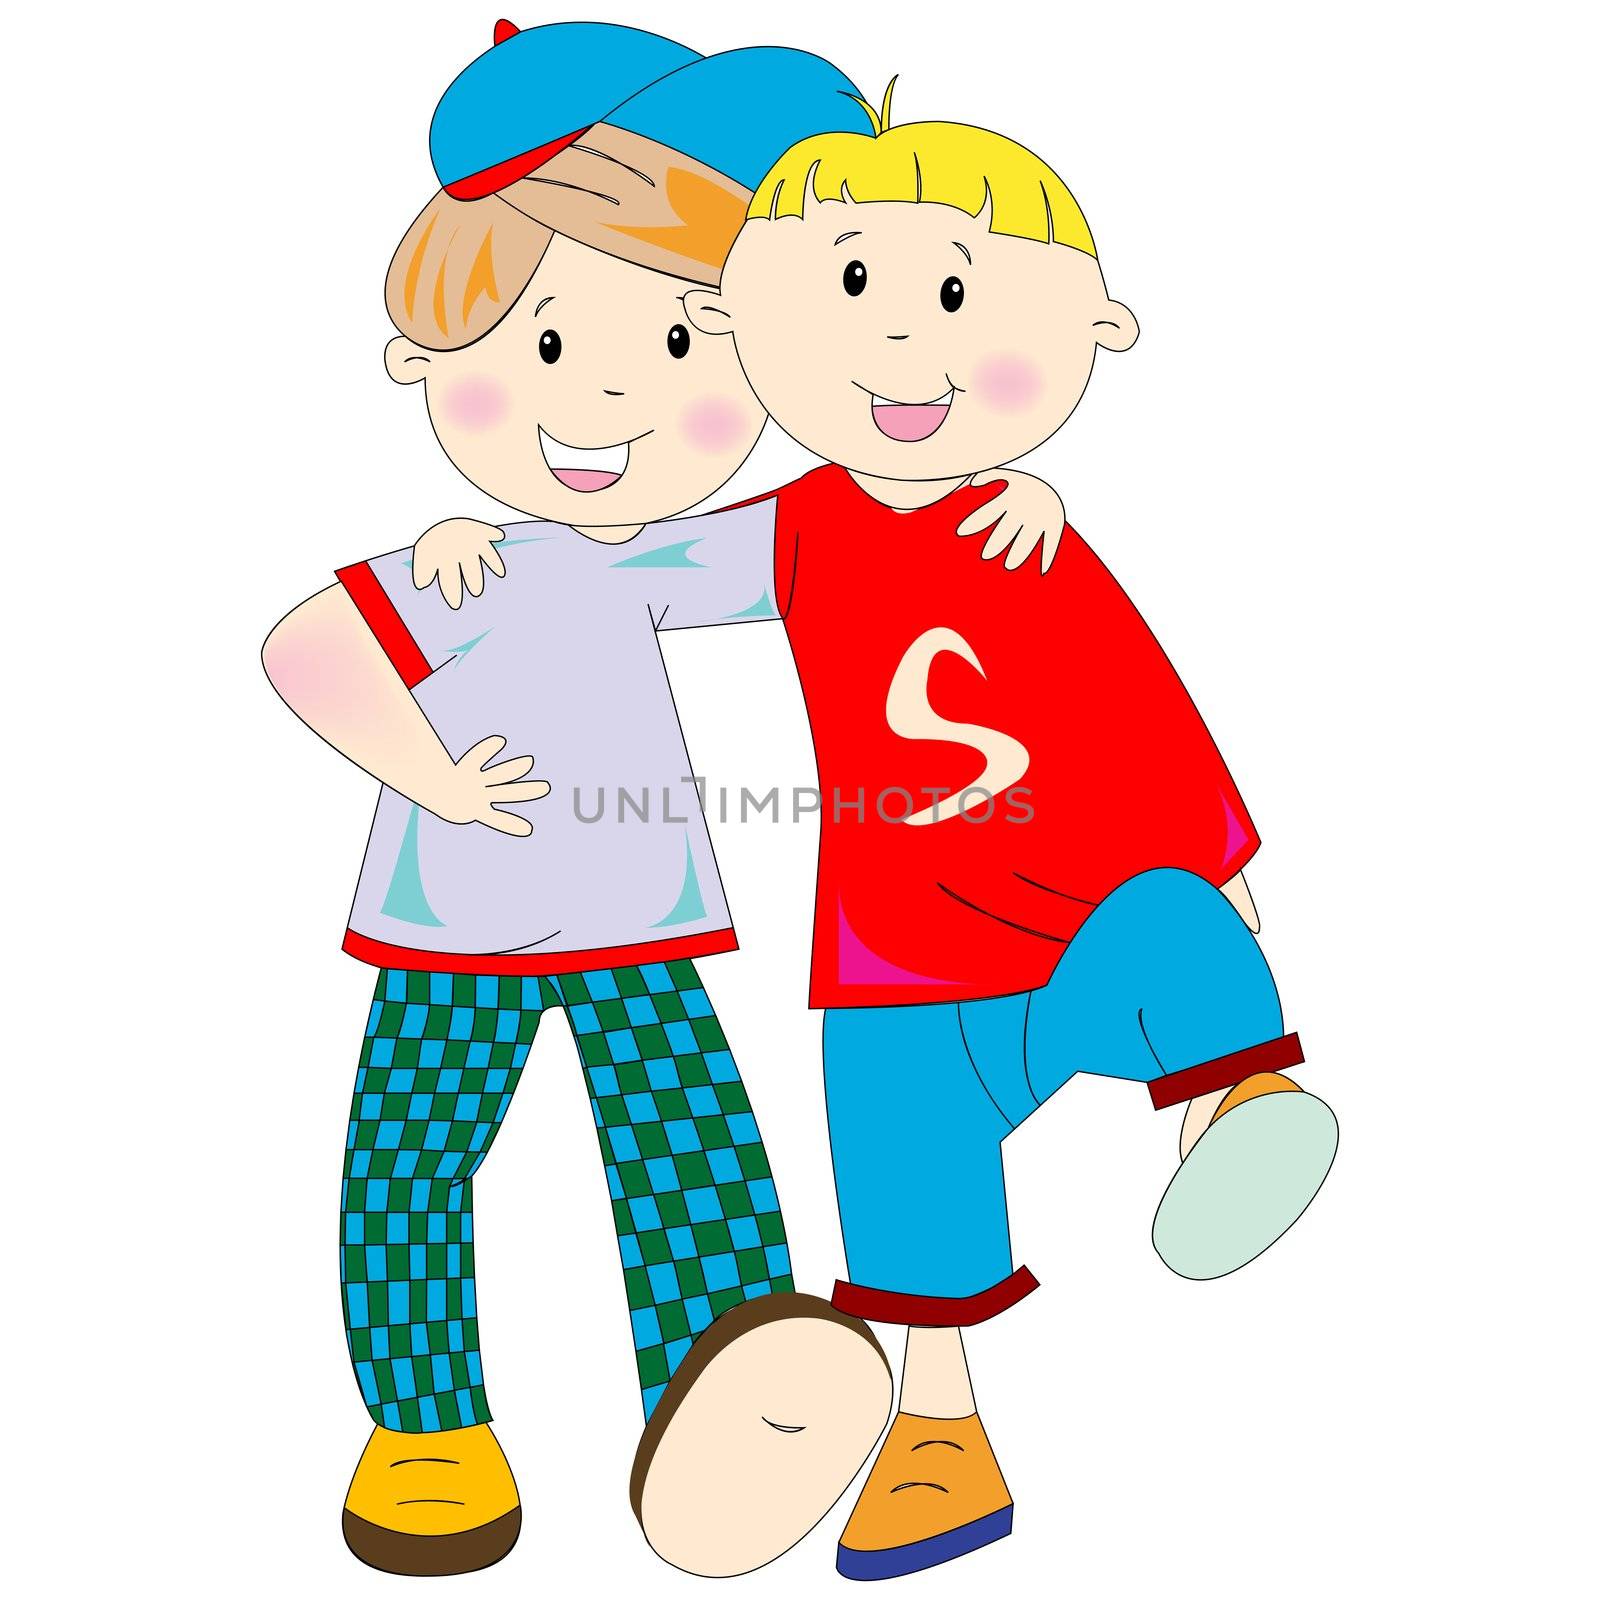 best friends cartoon against white background, abstract vector art illustration